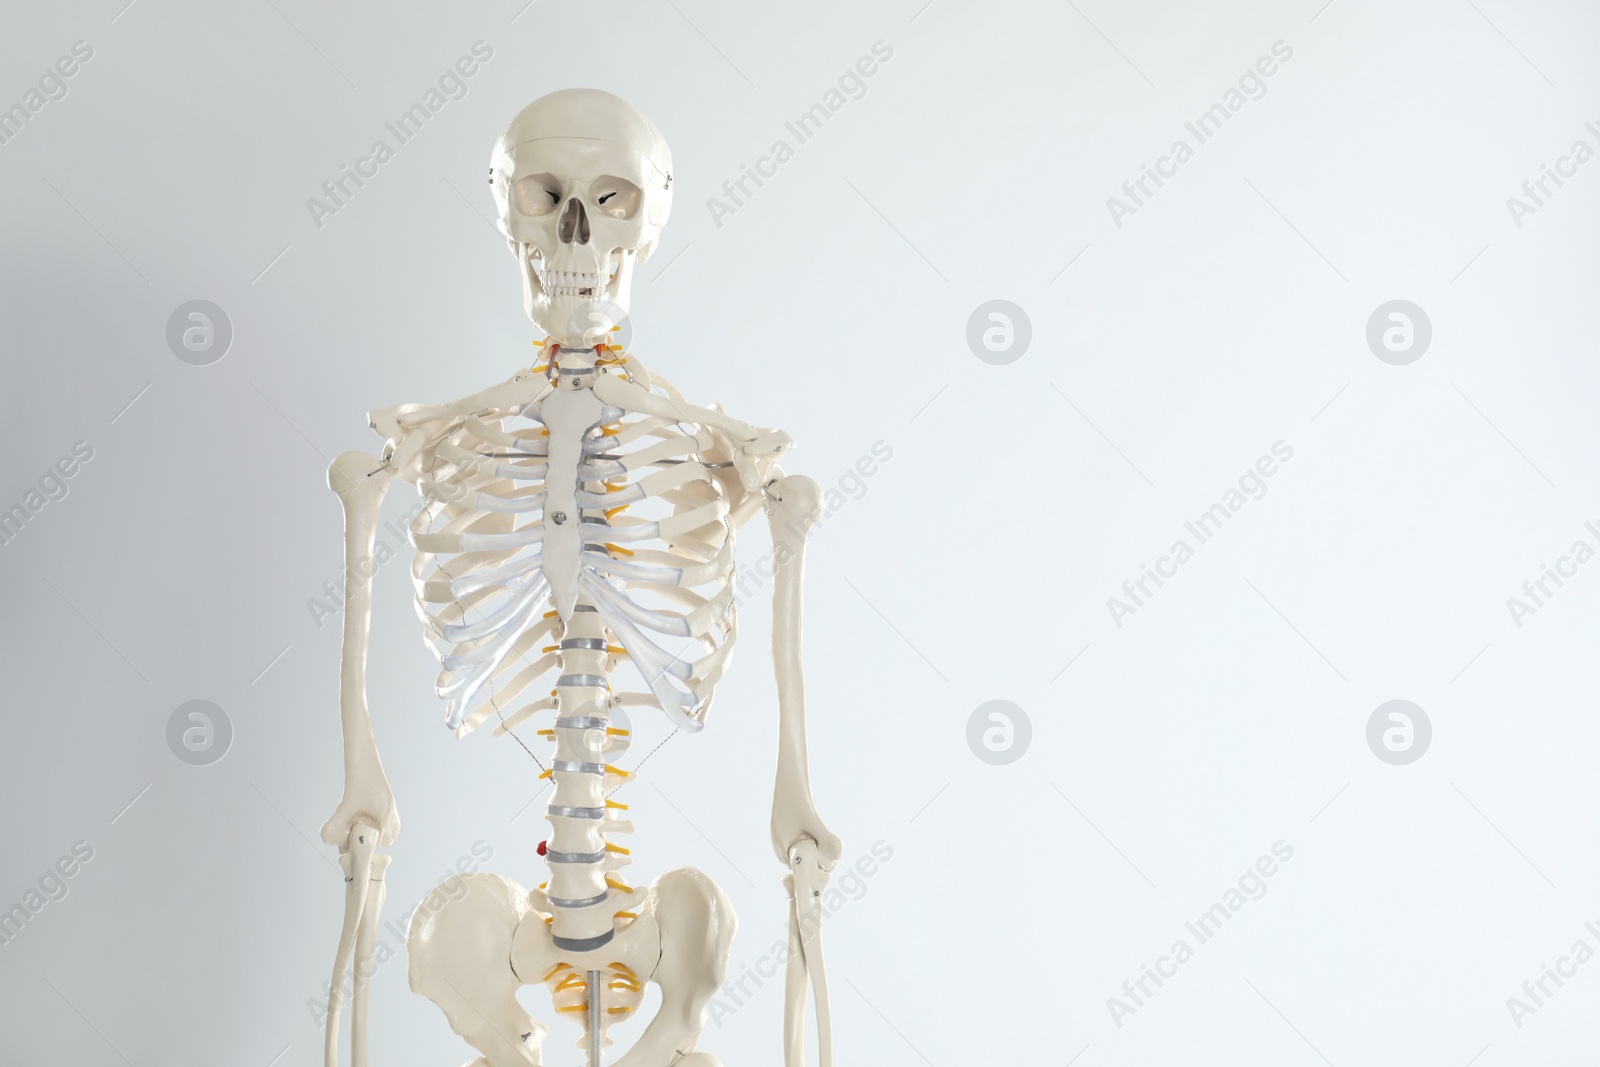 Photo of Artificial human skeleton model on white background. Space for text